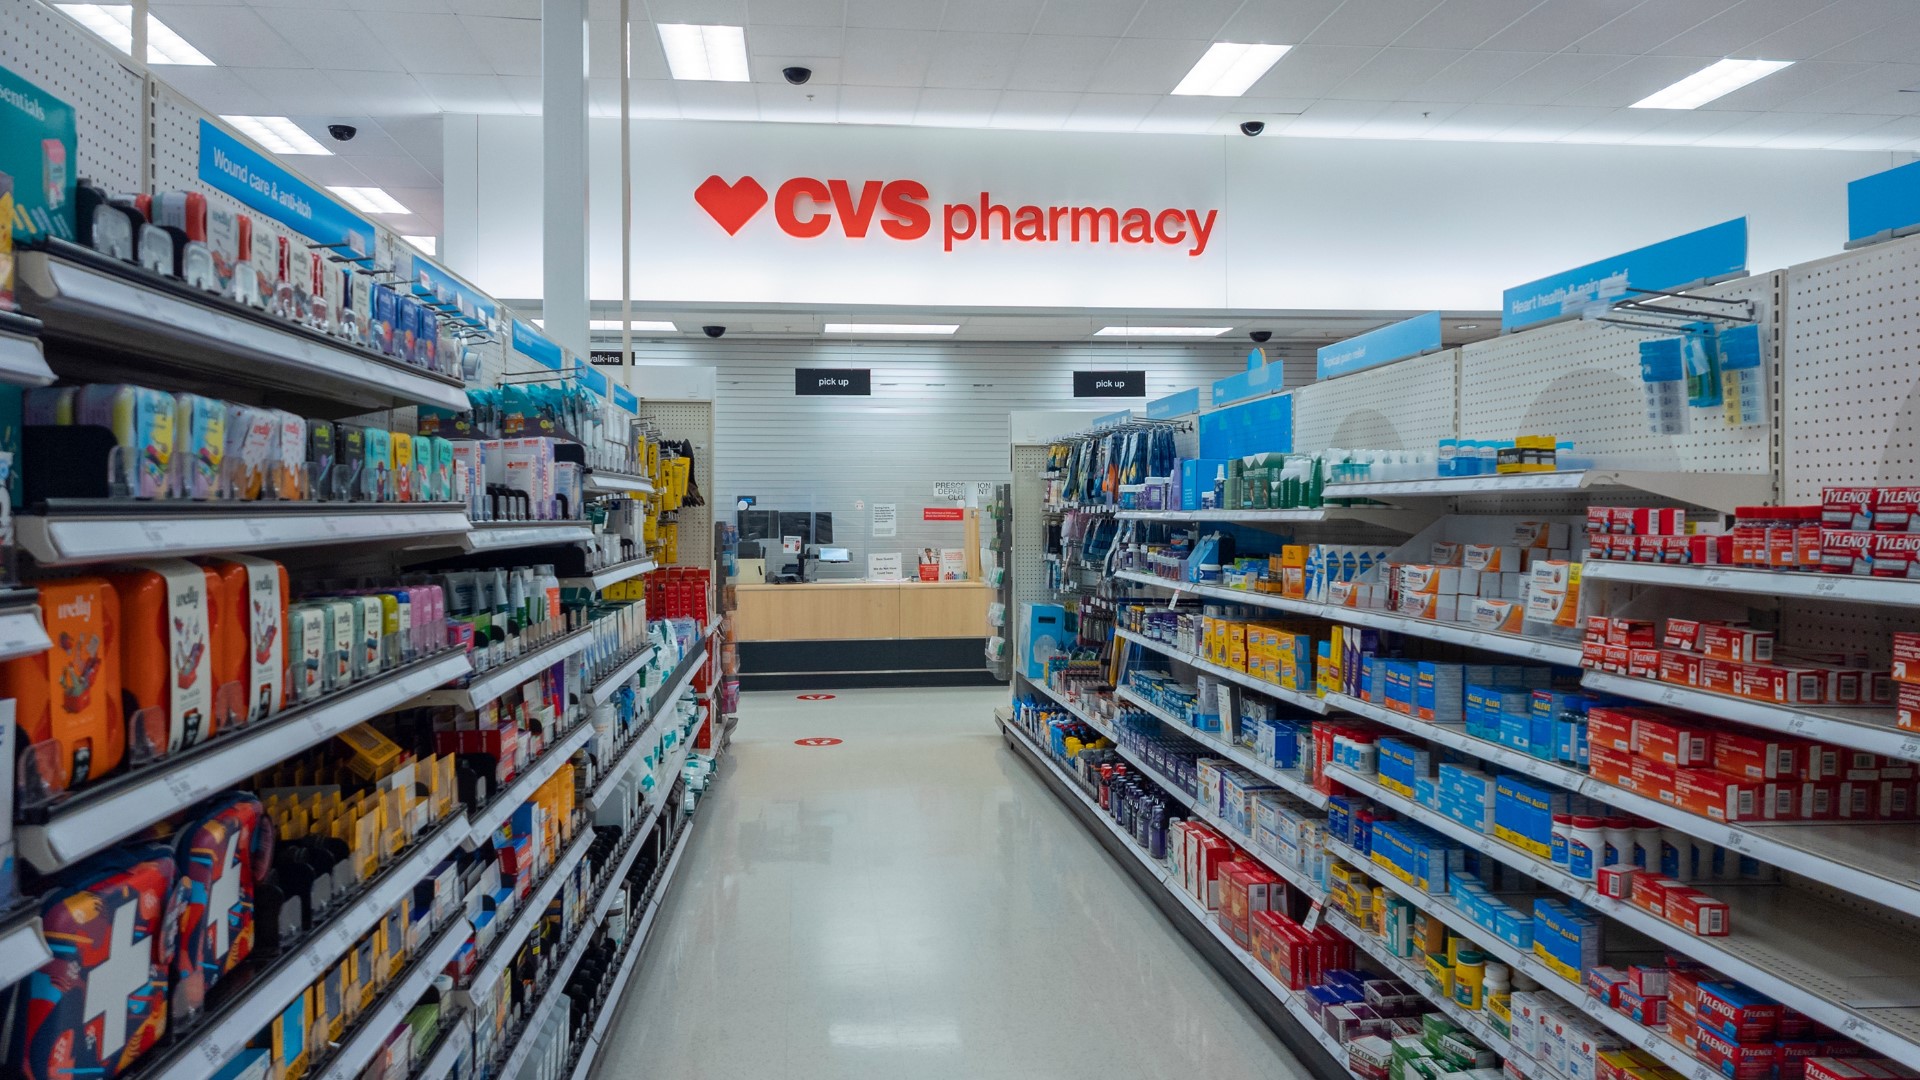 The company spokesperson called it a "difficult decision" for CVS.